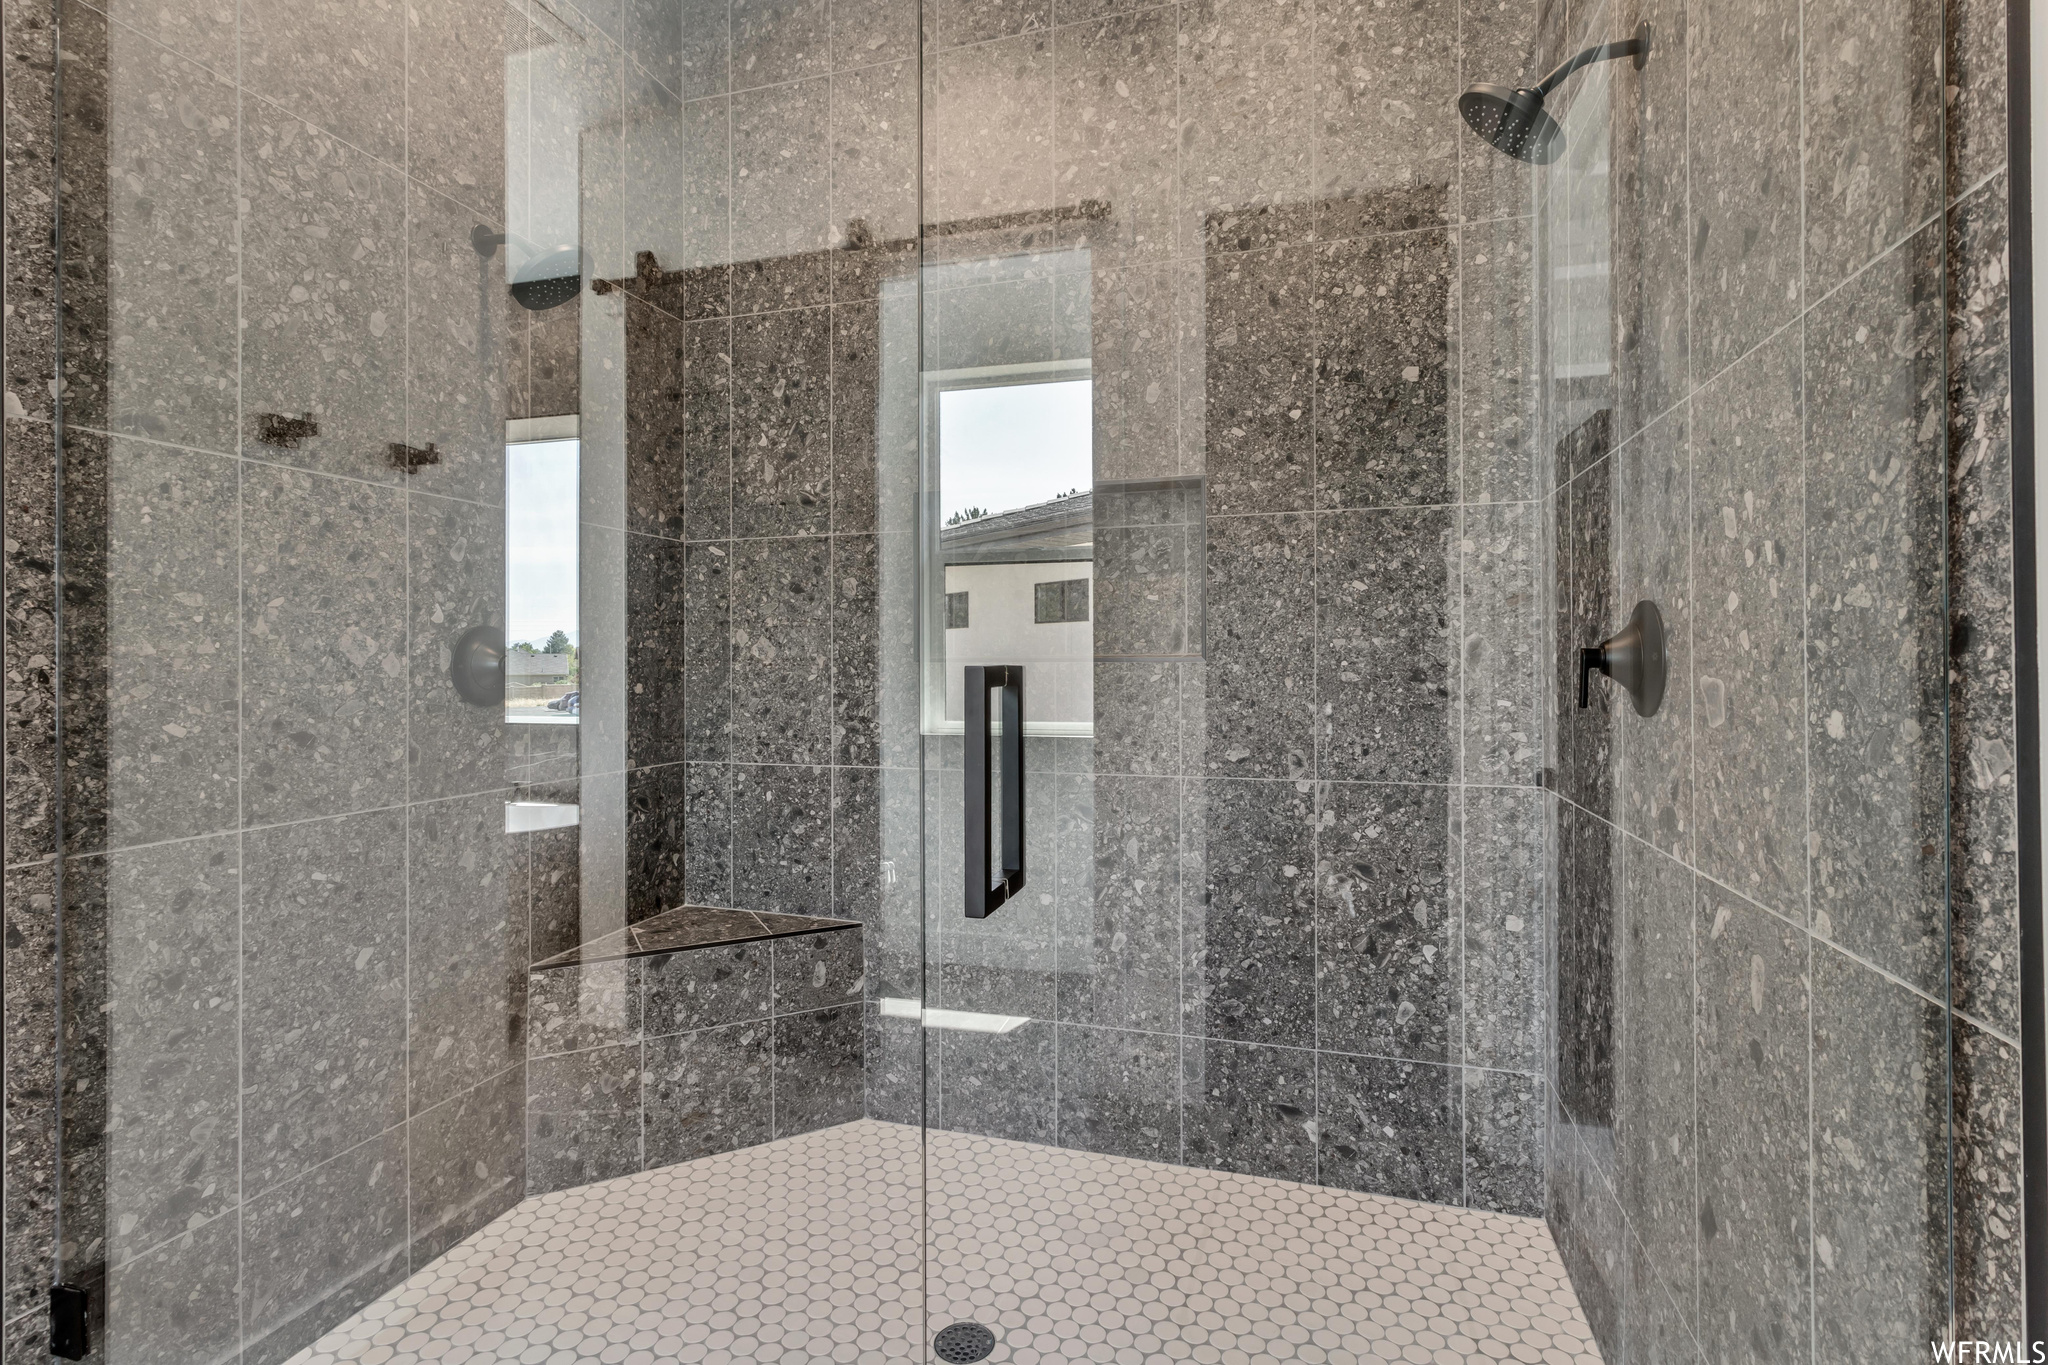 Full glass fronts open the shower to show off exquisite tile work